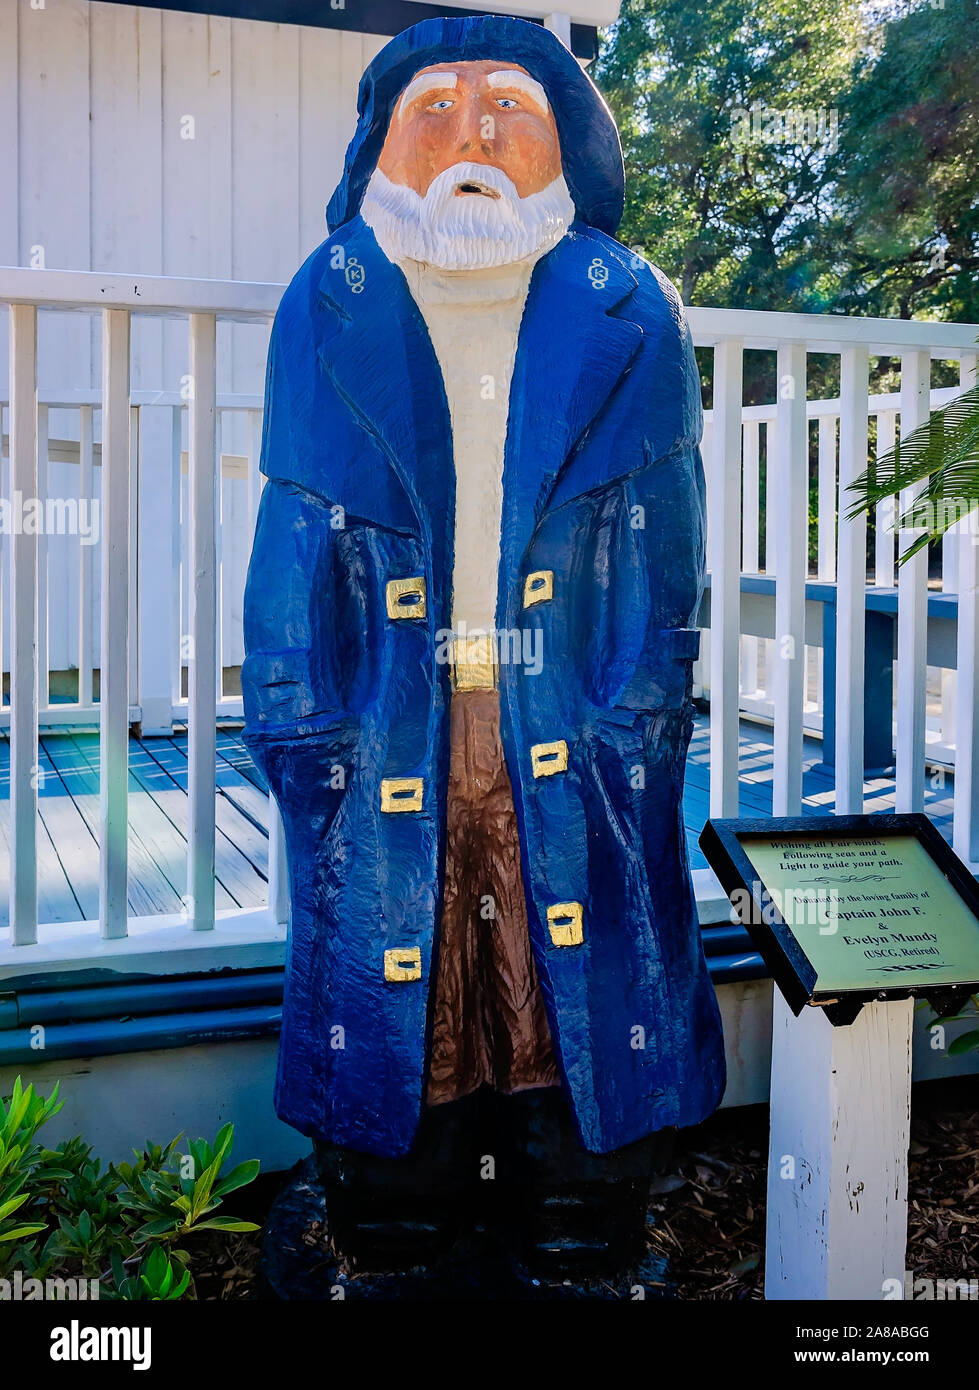 A statue of an old fisherman, dressed in a Navy pea coat and rain